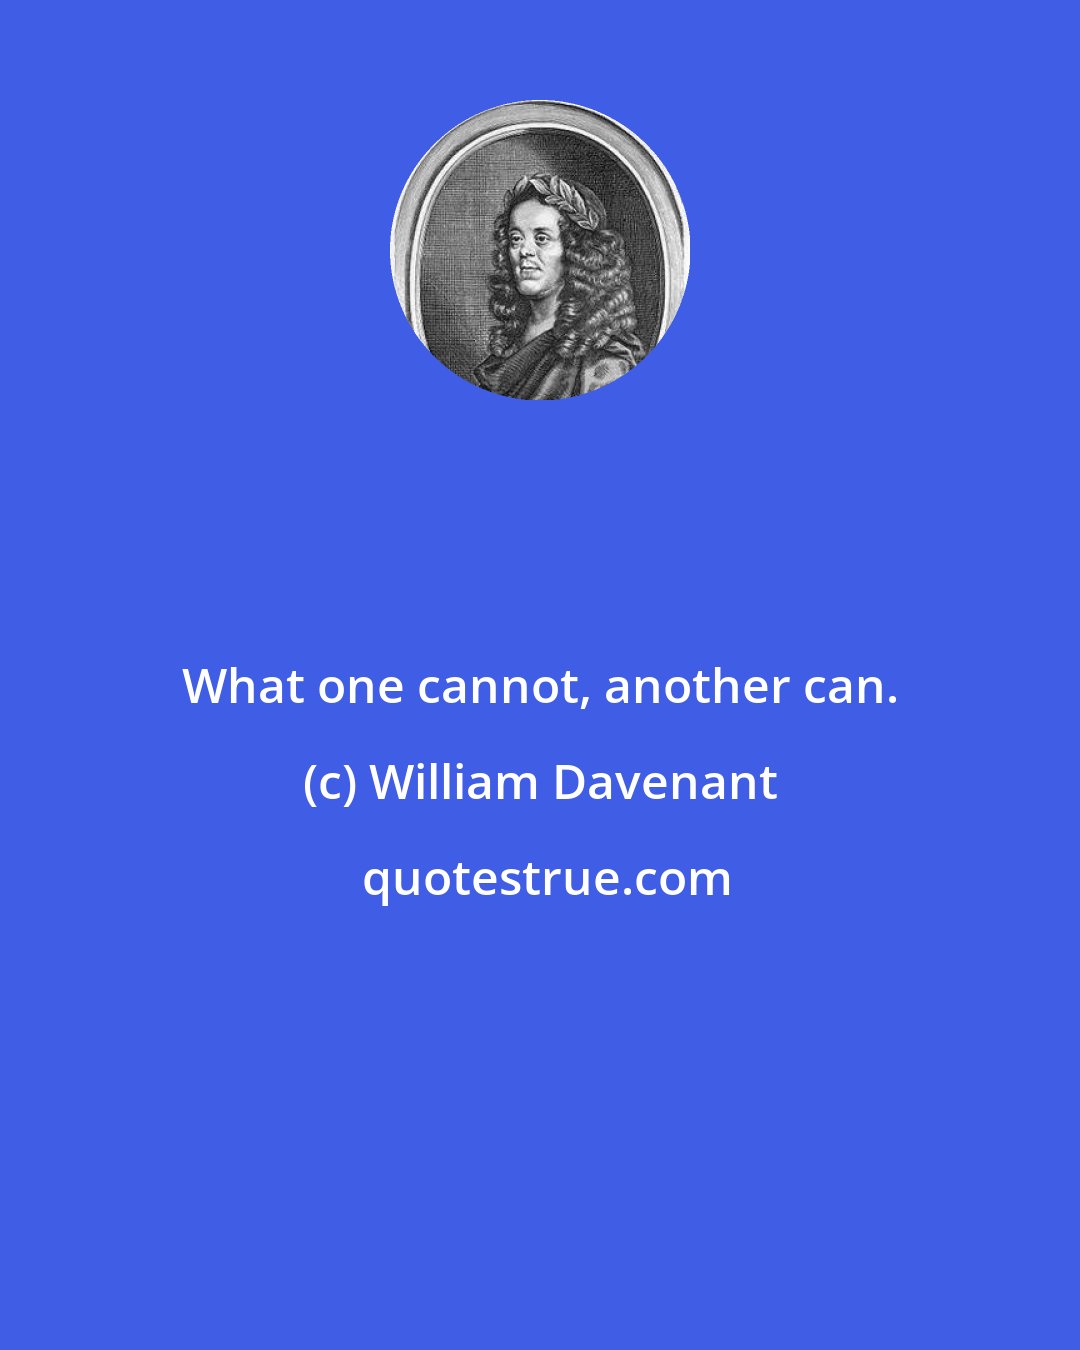 William Davenant: What one cannot, another can.